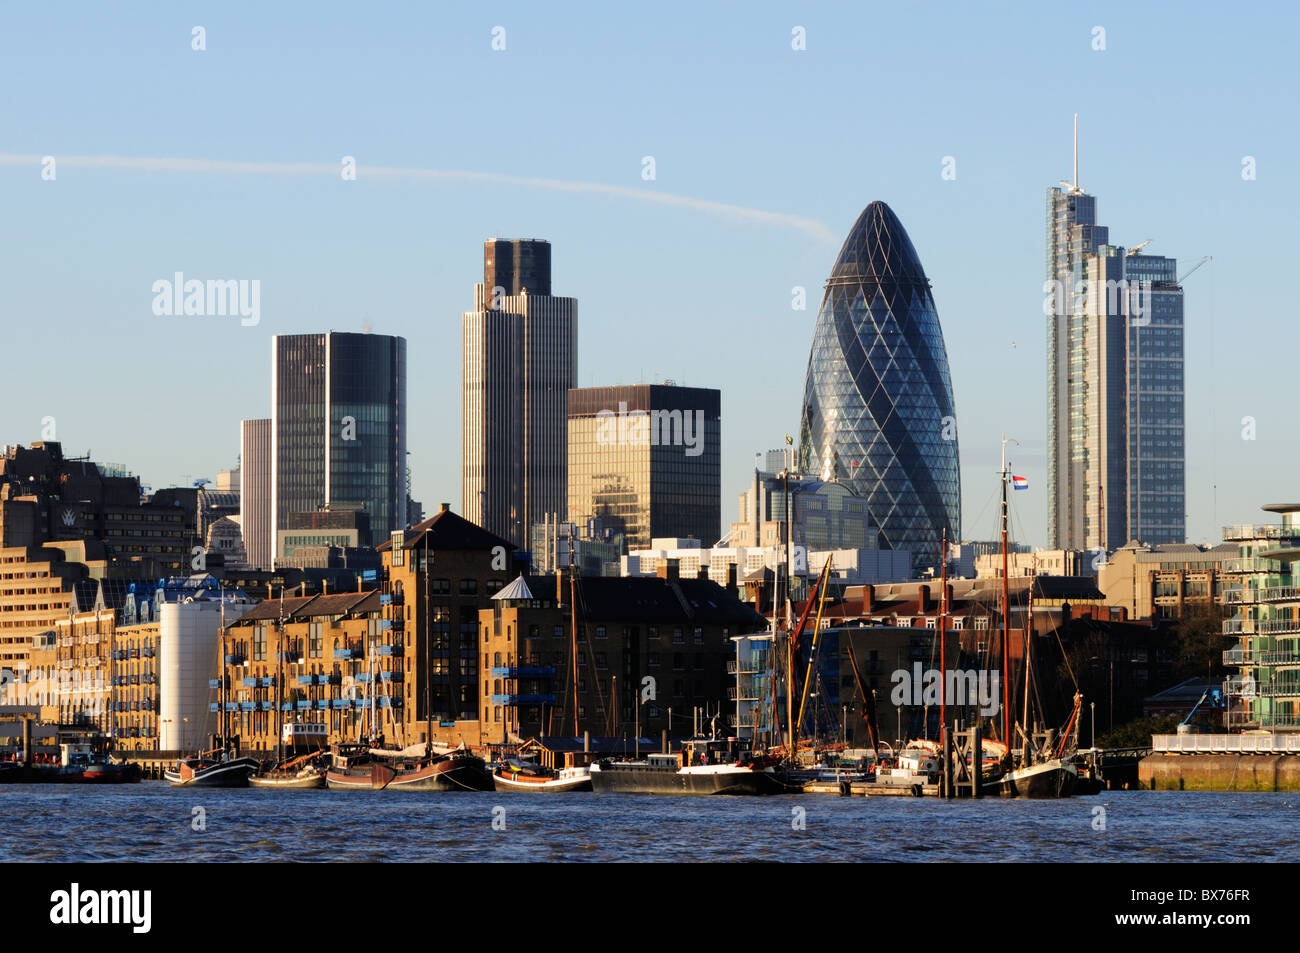 City of London Skyline including Tower 42, 30 St Mary Axe, and Heron Tower  from Bermondsey, London, England, UK Stock Photo